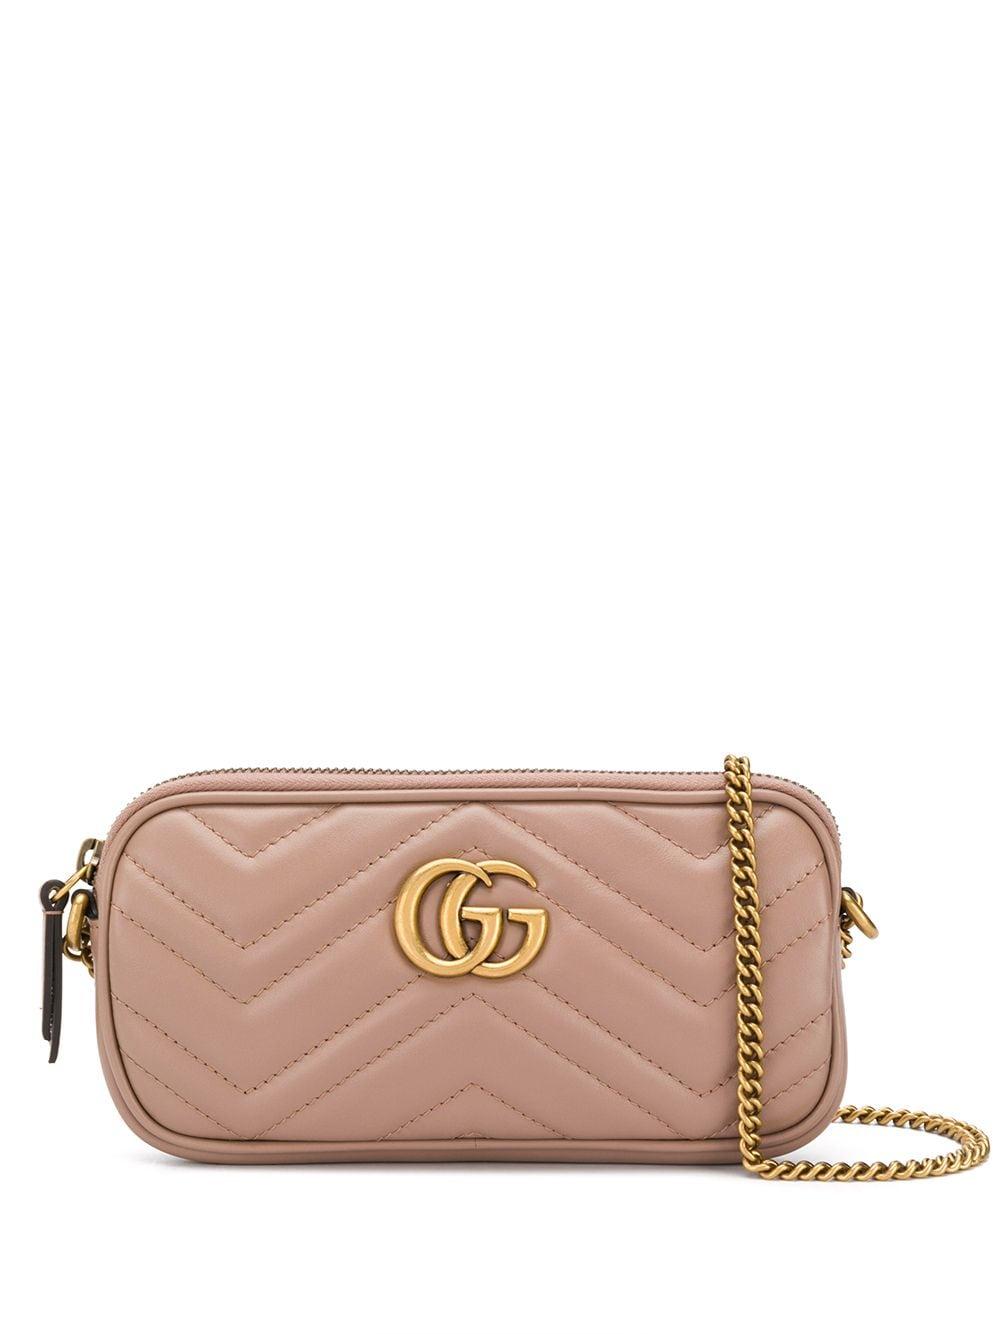 Gucci Leather GG Marmont Crossbody Bag - Lyst